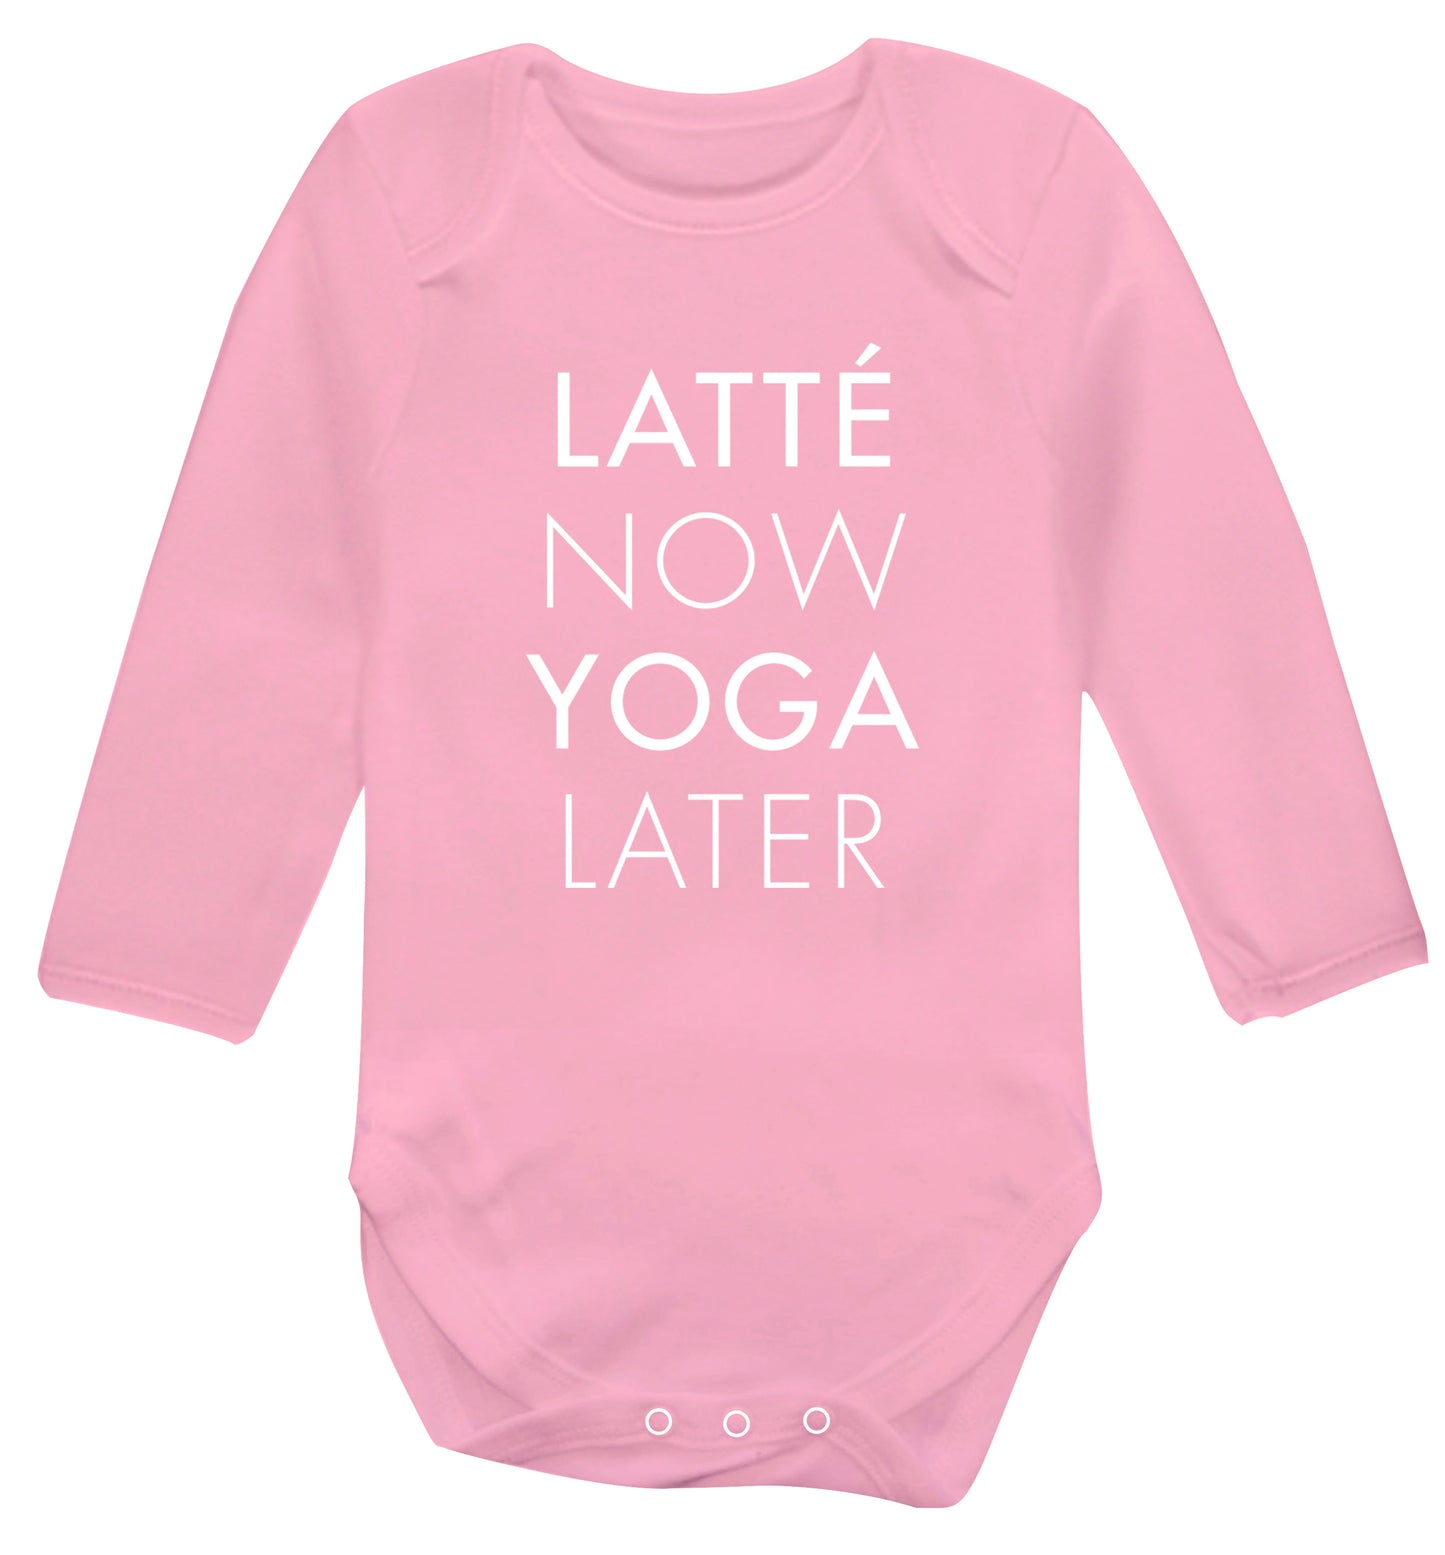 Latte now yoga later Baby Vest long sleeved pale pink 6-12 months